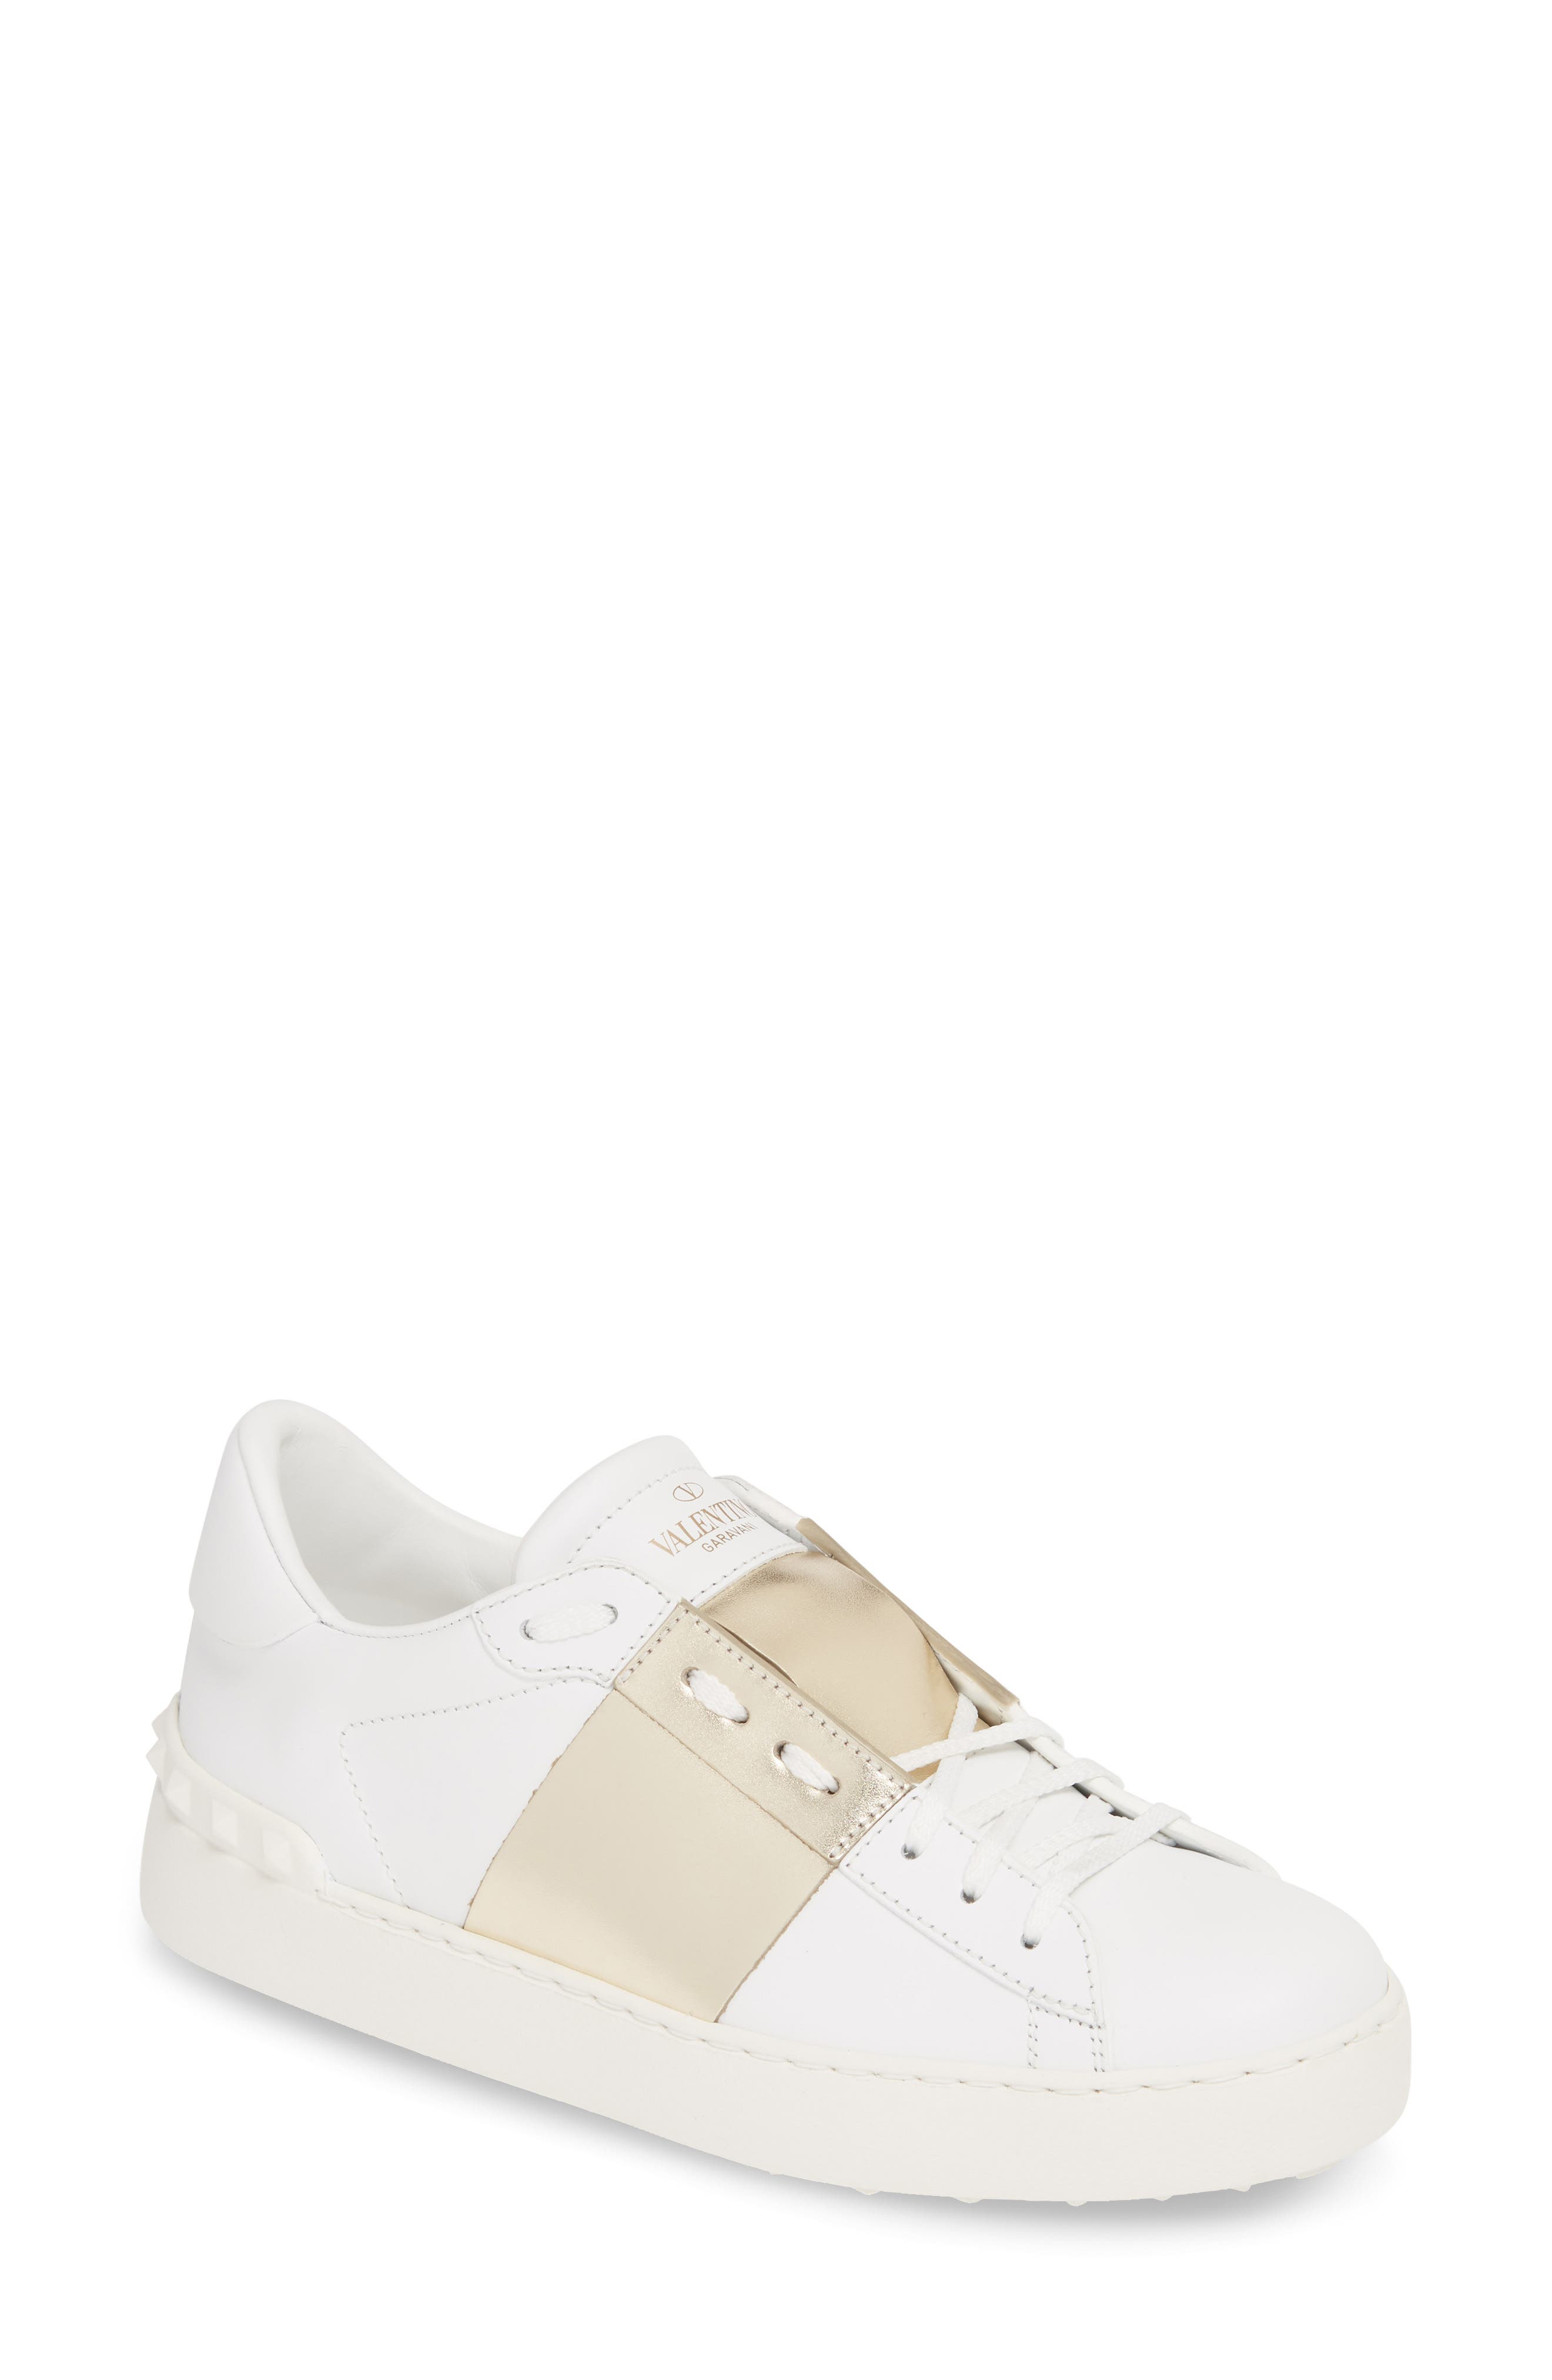 valentino shoes sale womens